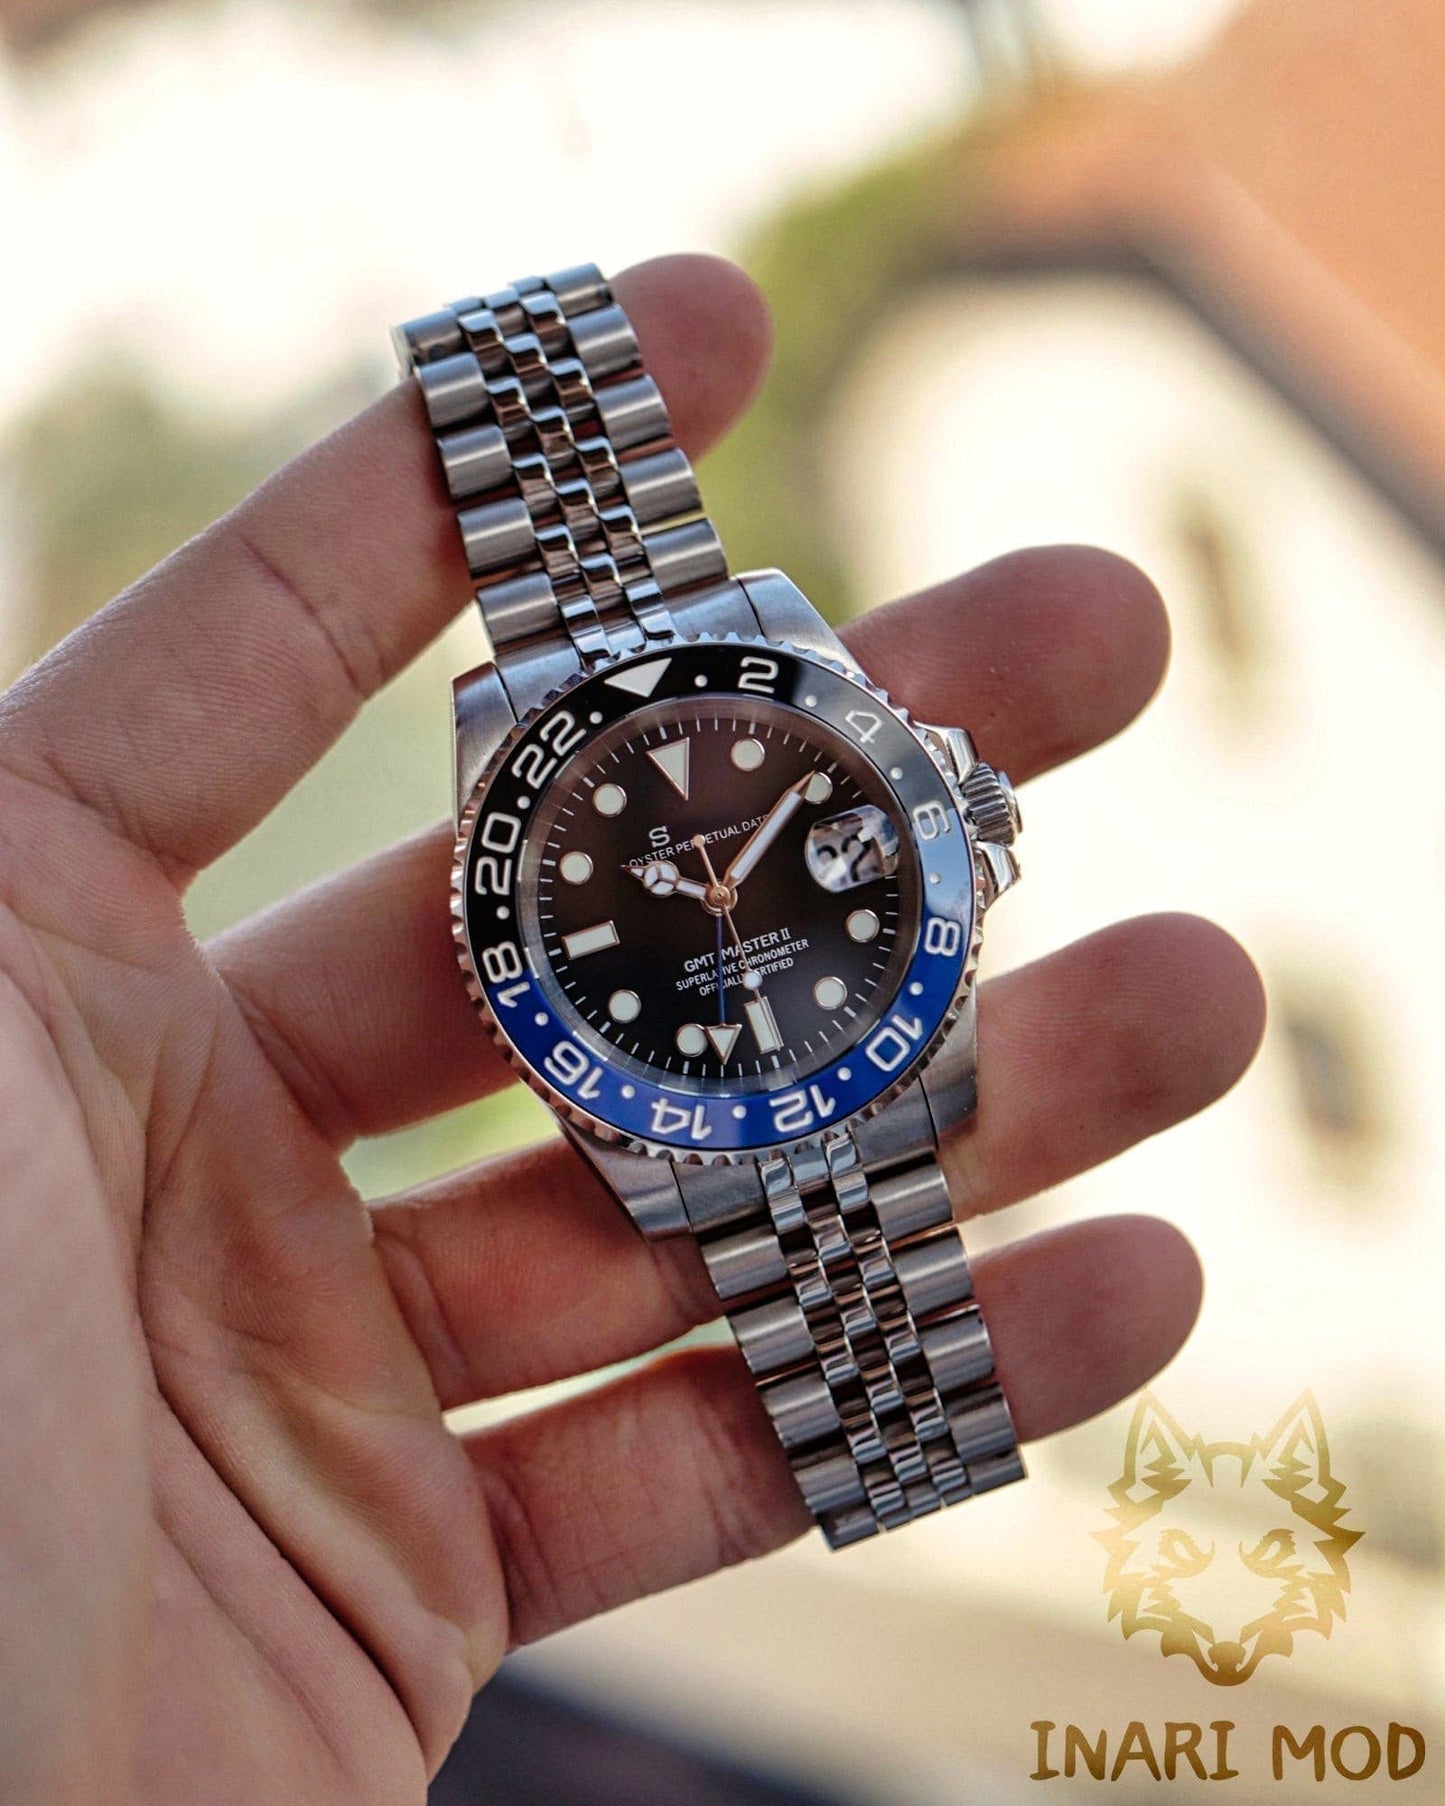 Seiko Mod Batman GMT from Inarimod for 379.90